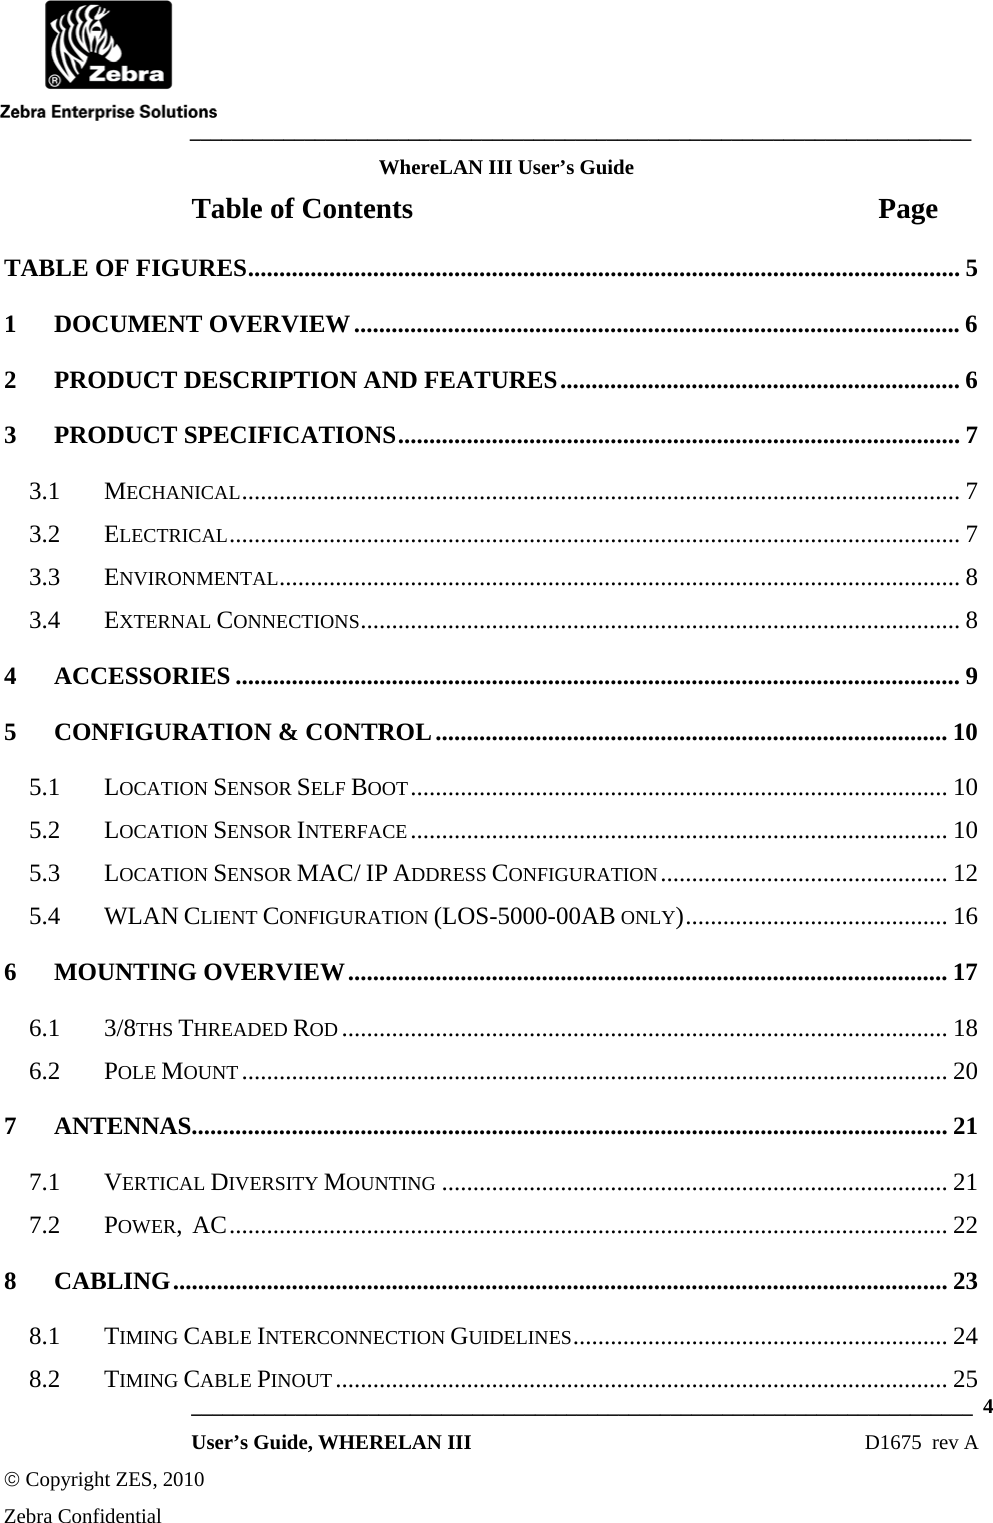    ___________________________________________________________________________ WhereLAN III User’s Guide  ___________________________________________________________________________  4  User’s Guide, WHERELAN III  D1675  rev A © Copyright ZES, 2010 Zebra Confidential Table of Contents  Page TABLE OF FIGURES.................................................................................................................. 5 1 DOCUMENT OVERVIEW................................................................................................. 6 2 PRODUCT DESCRIPTION AND FEATURES................................................................ 6 3 PRODUCT SPECIFICATIONS.......................................................................................... 7 3.1 MECHANICAL................................................................................................................... 7 3.2 ELECTRICAL..................................................................................................................... 7 3.3 ENVIRONMENTAL............................................................................................................. 8 3.4 EXTERNAL CONNECTIONS................................................................................................ 8 4 ACCESSORIES .................................................................................................................... 9 5 CONFIGURATION &amp; CONTROL.................................................................................. 10 5.1 LOCATION SENSOR SELF BOOT...................................................................................... 10 5.2 LOCATION SENSOR INTERFACE...................................................................................... 10 5.3 LOCATION SENSOR MAC/ IP ADDRESS CONFIGURATION.............................................. 12 5.4 WLAN CLIENT CONFIGURATION (LOS-5000-00AB ONLY).......................................... 16 6 MOUNTING OVERVIEW................................................................................................ 17 6.1 3/8THS THREADED ROD ................................................................................................. 18 6.2 POLE MOUNT ................................................................................................................. 20 7 ANTENNAS......................................................................................................................... 21 7.1 VERTICAL DIVERSITY MOUNTING ................................................................................. 21 7.2 POWER,  AC................................................................................................................... 22 8 CABLING............................................................................................................................ 23 8.1 TIMING CABLE INTERCONNECTION GUIDELINES............................................................ 24 8.2 TIMING CABLE PINOUT.................................................................................................. 25 